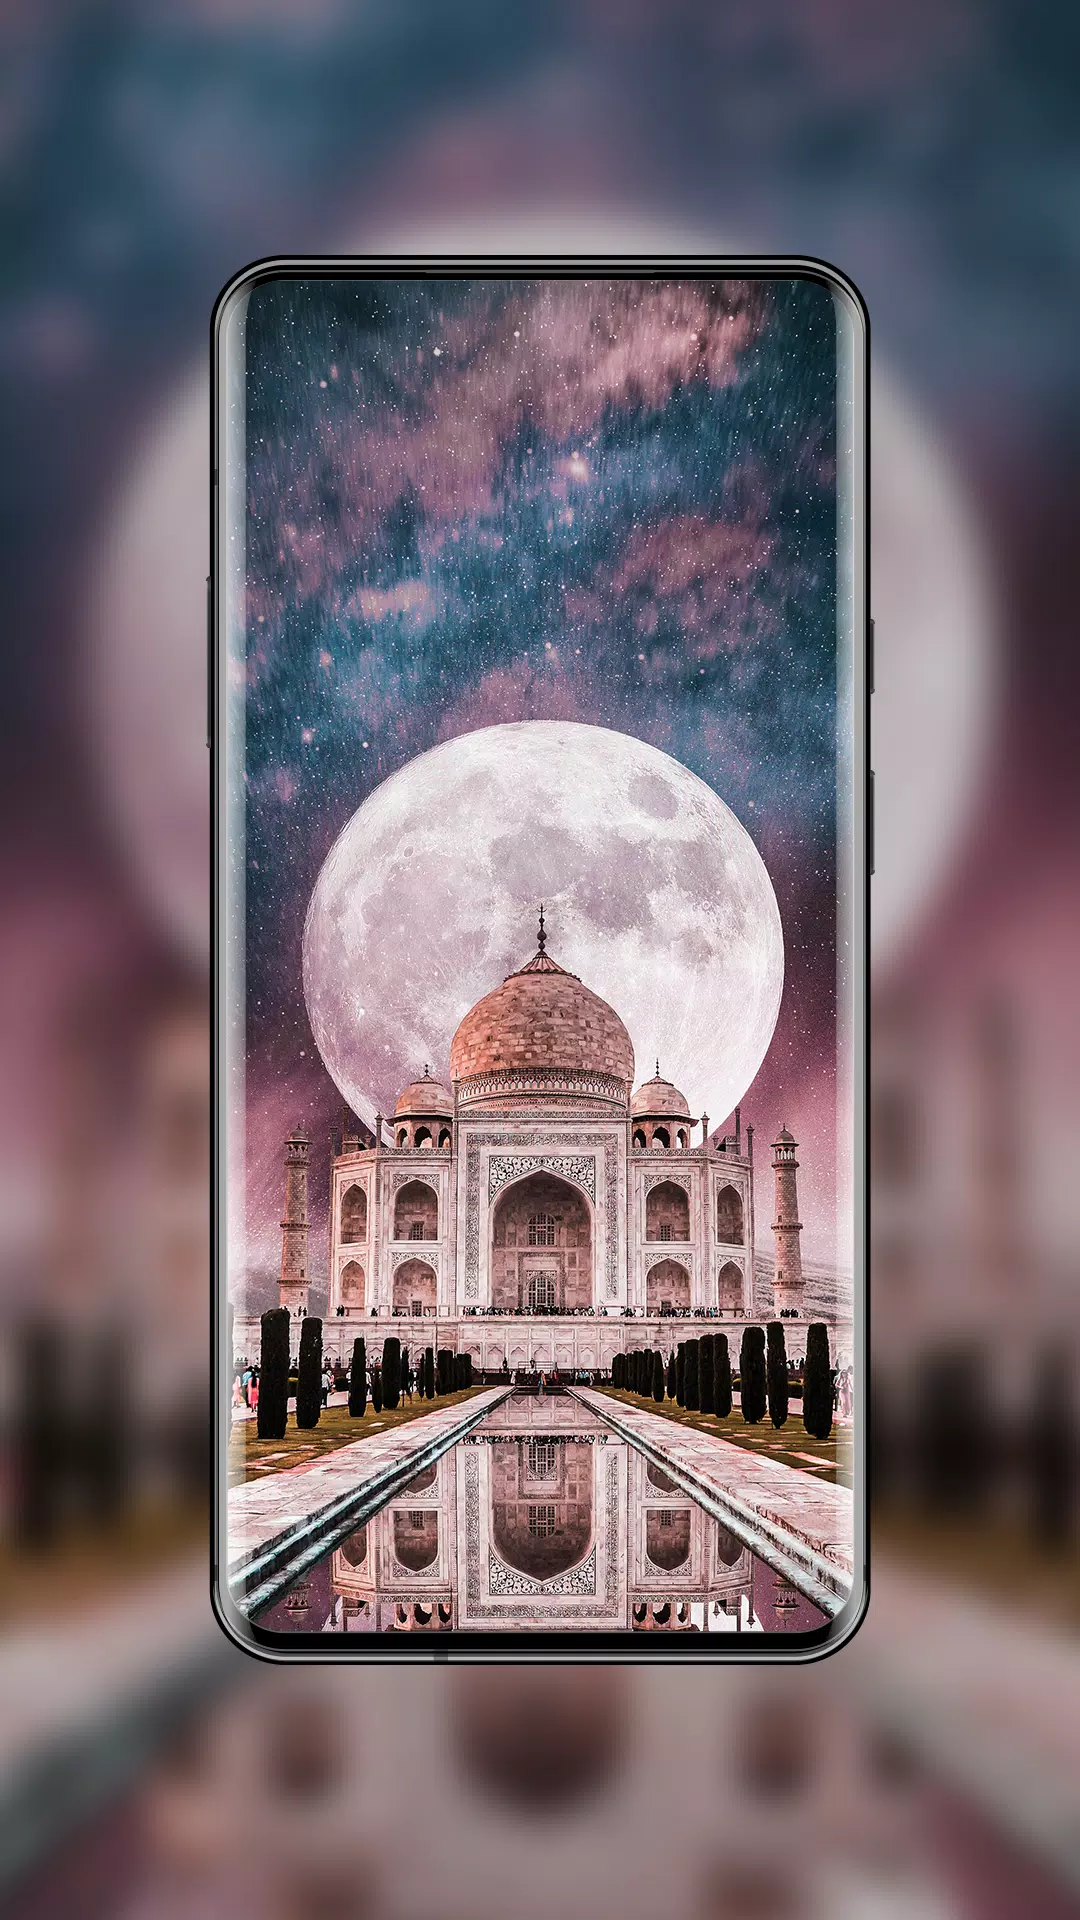 K wallpapers hd backgrounds apk for android download